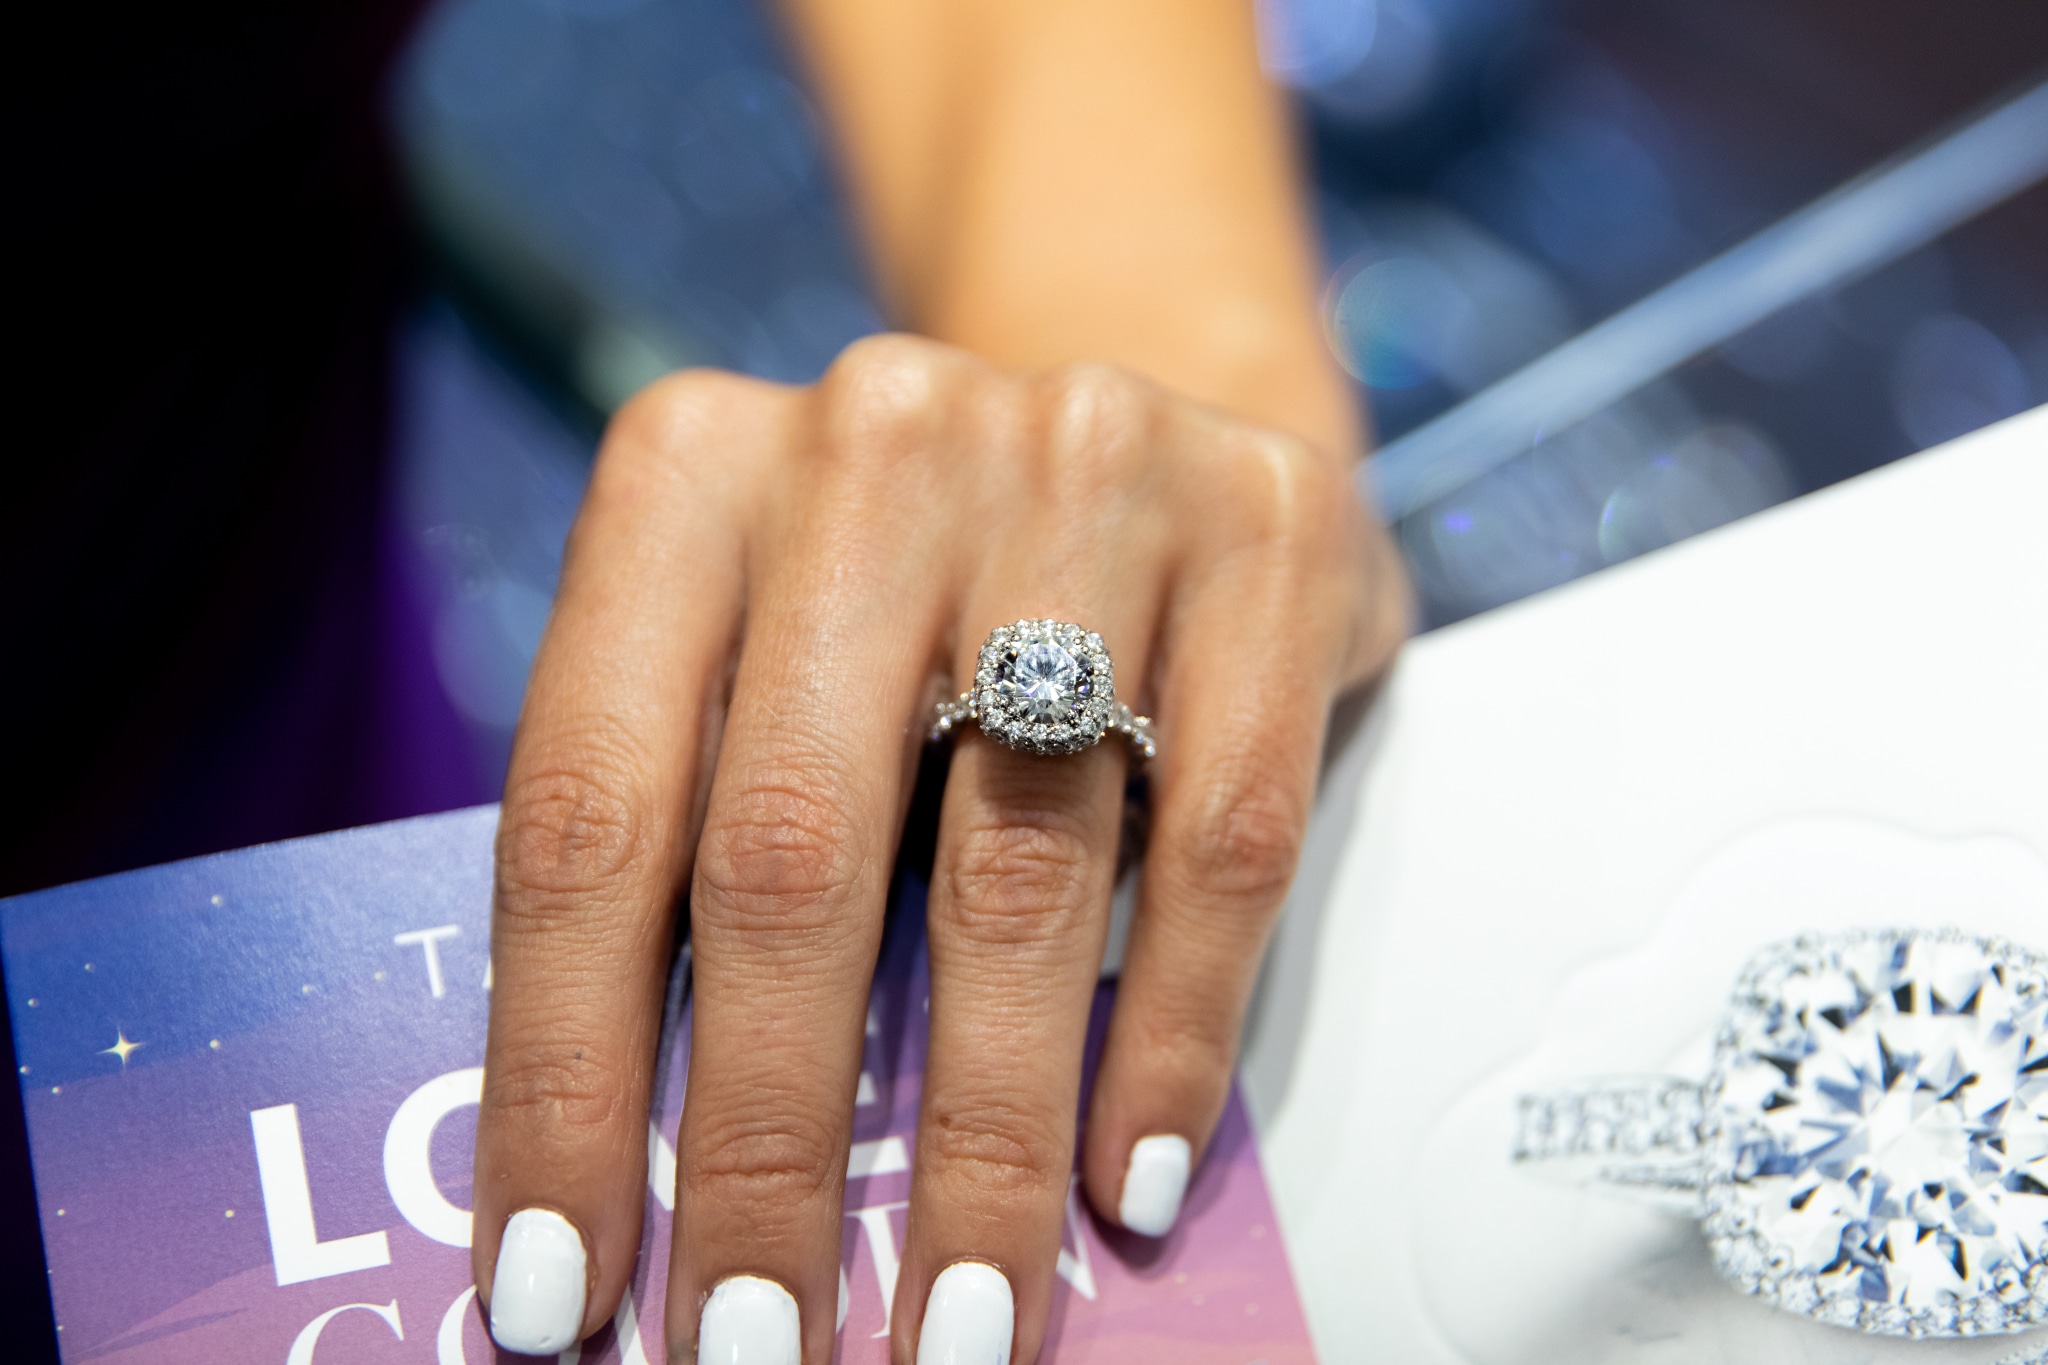 image 9 4 Don’t miss Tacori at Diamonds Direct in Birmingham Sept. 13-14. Free gifts + 0% APR for 5 years!